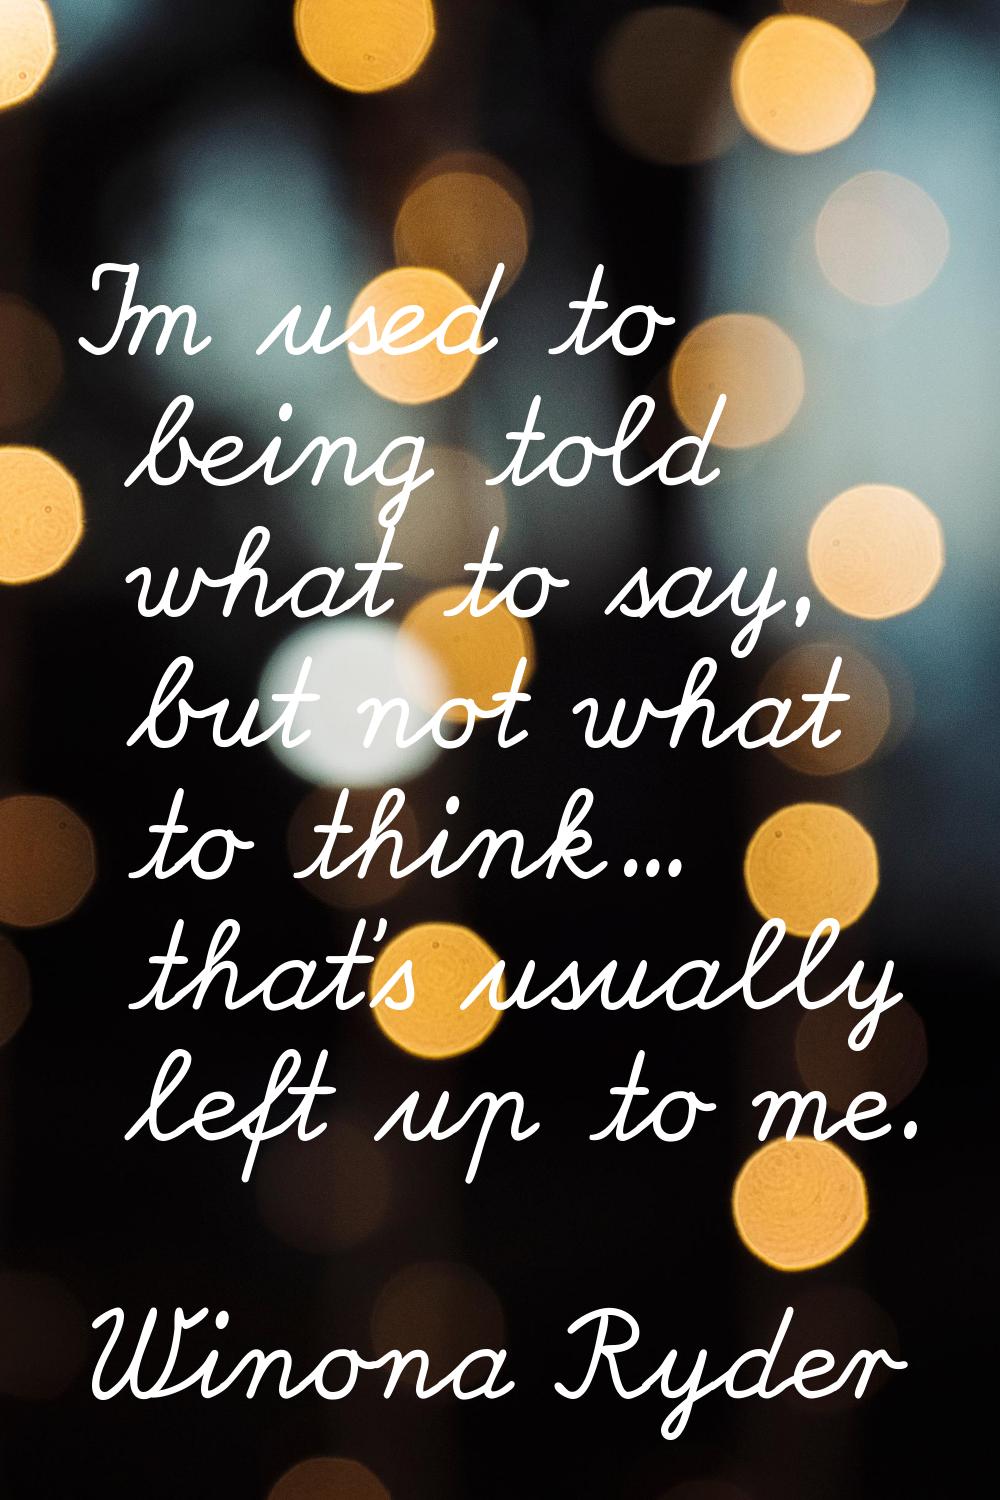 I'm used to being told what to say, but not what to think... that's usually left up to me.